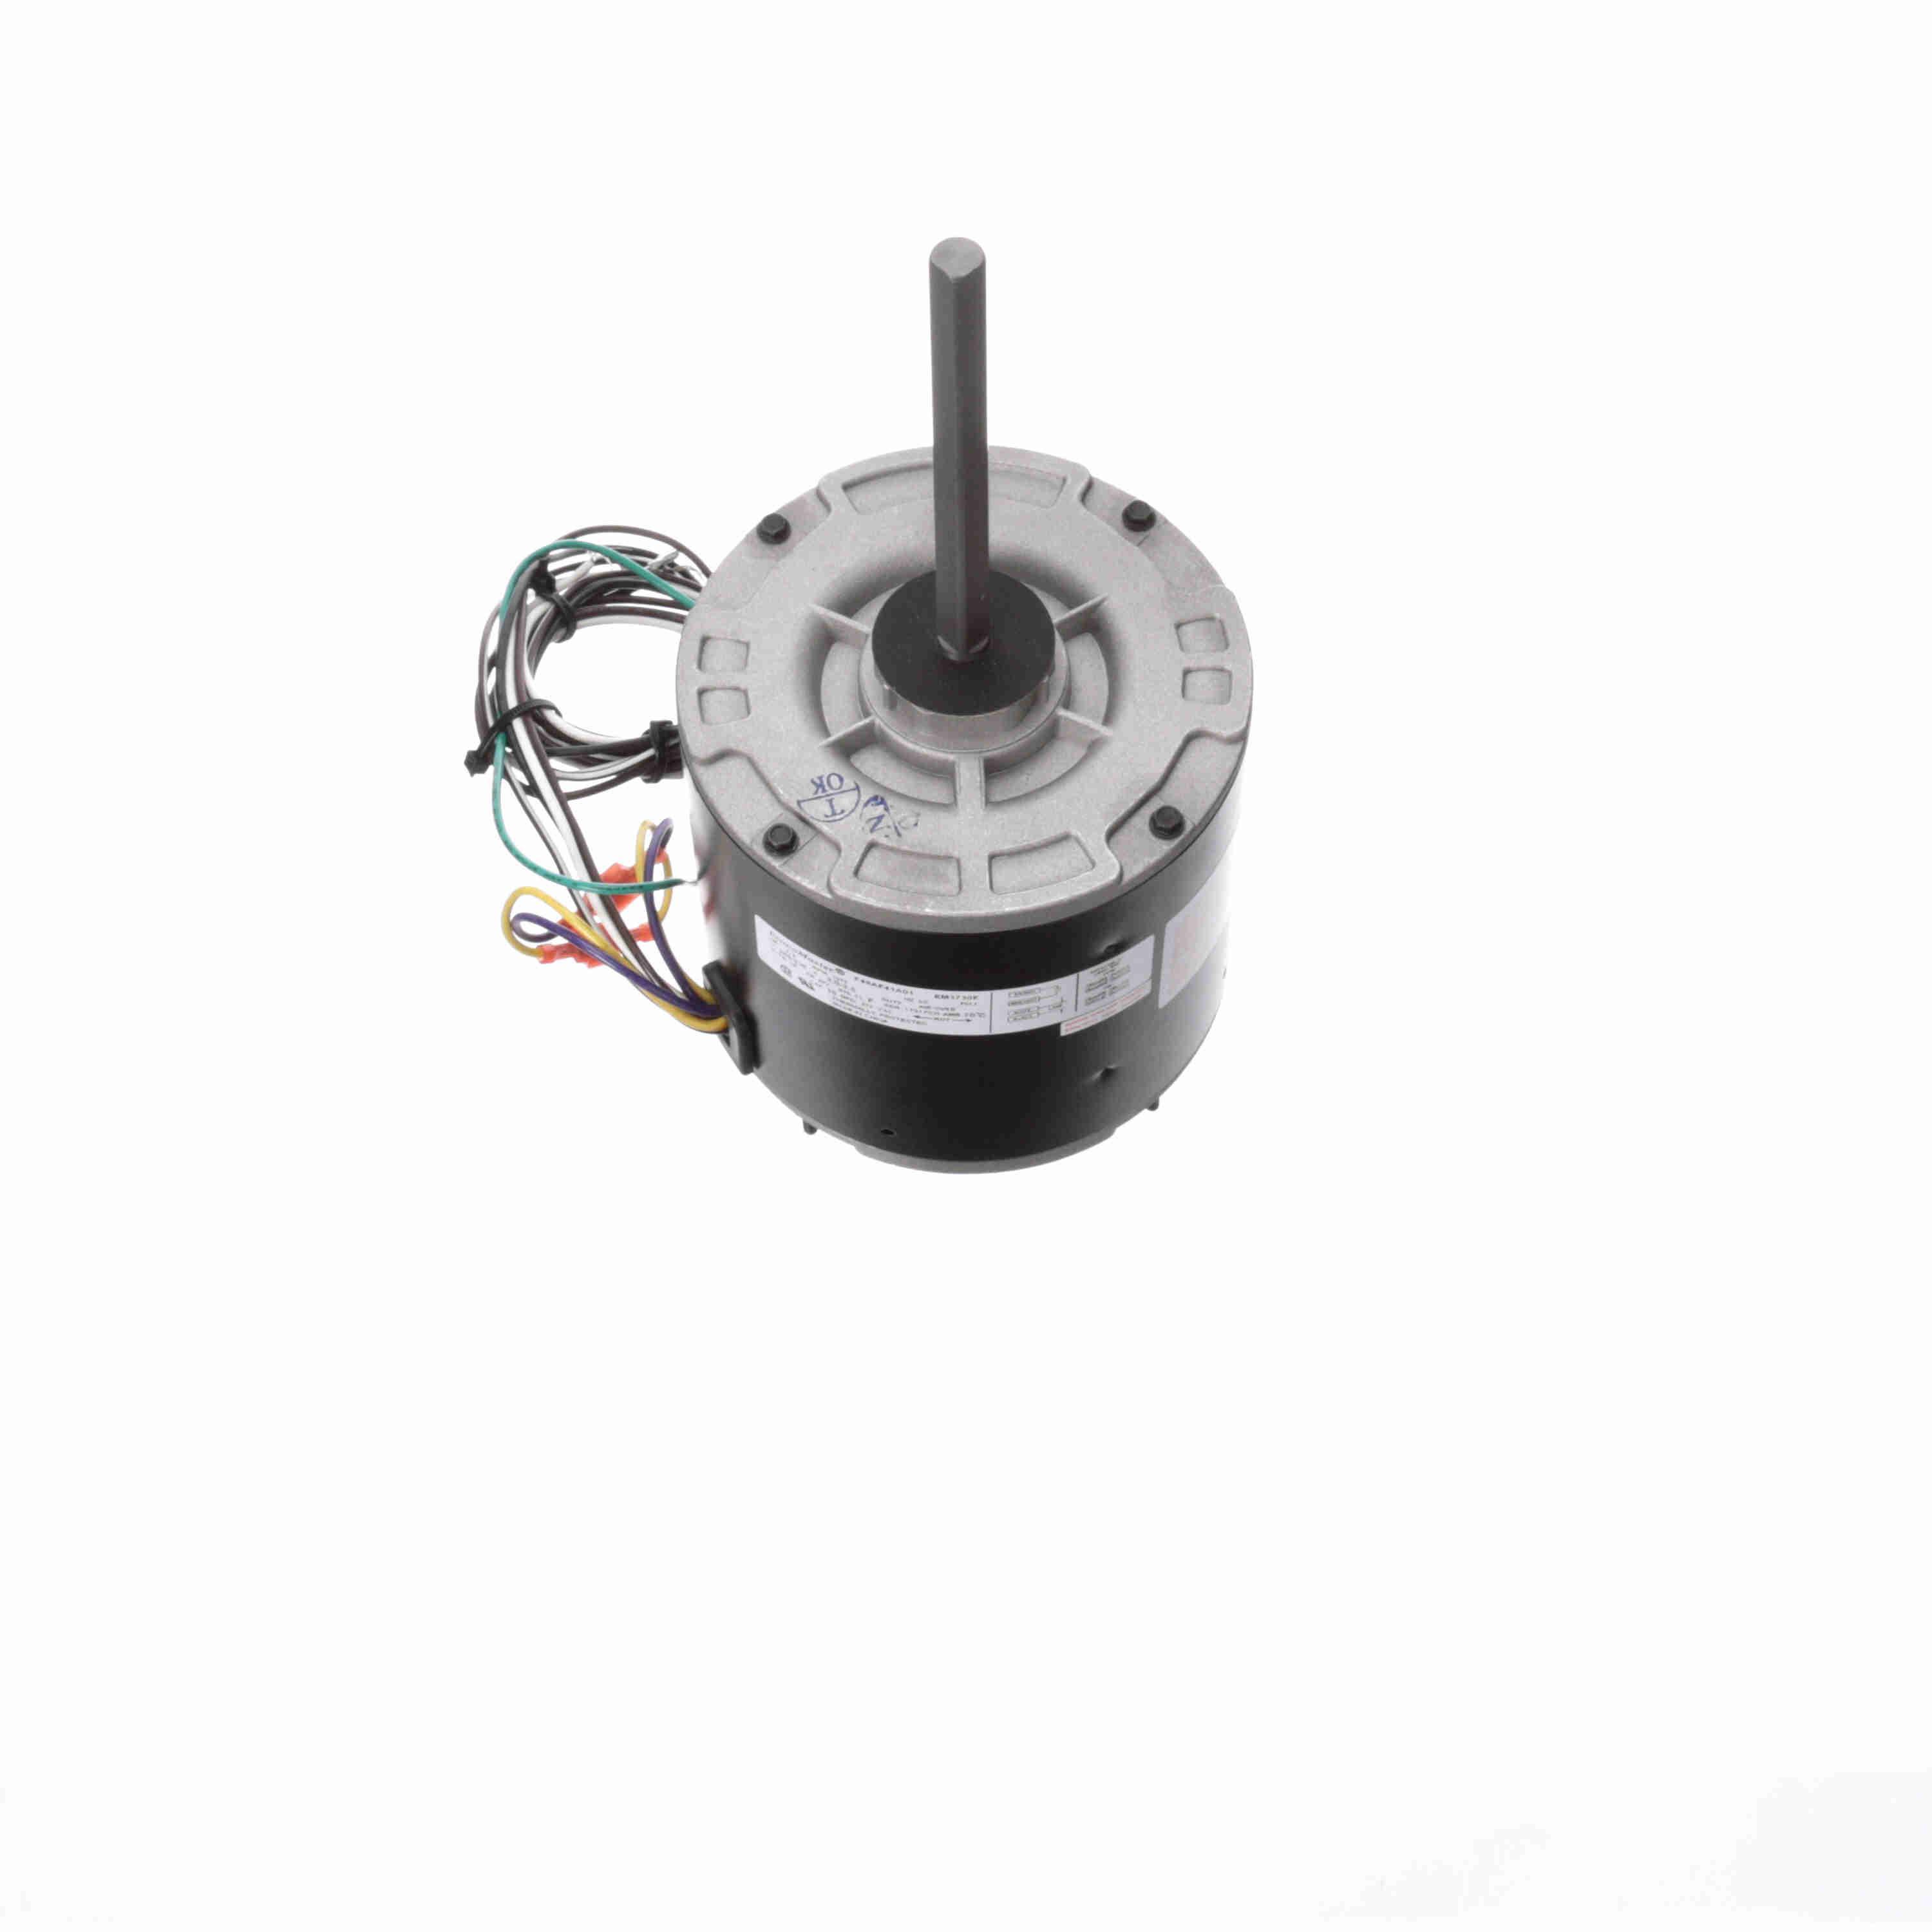 Century® EM3730F 6-Pole HVAC/R Motor, Totally Enclosed Air Over Enclosure, 1/2 hp, 208 to 230 V, 60 Hz, 1 Phase, 48Y Frame, 1075 rpm Speed, Extended Stud Mount